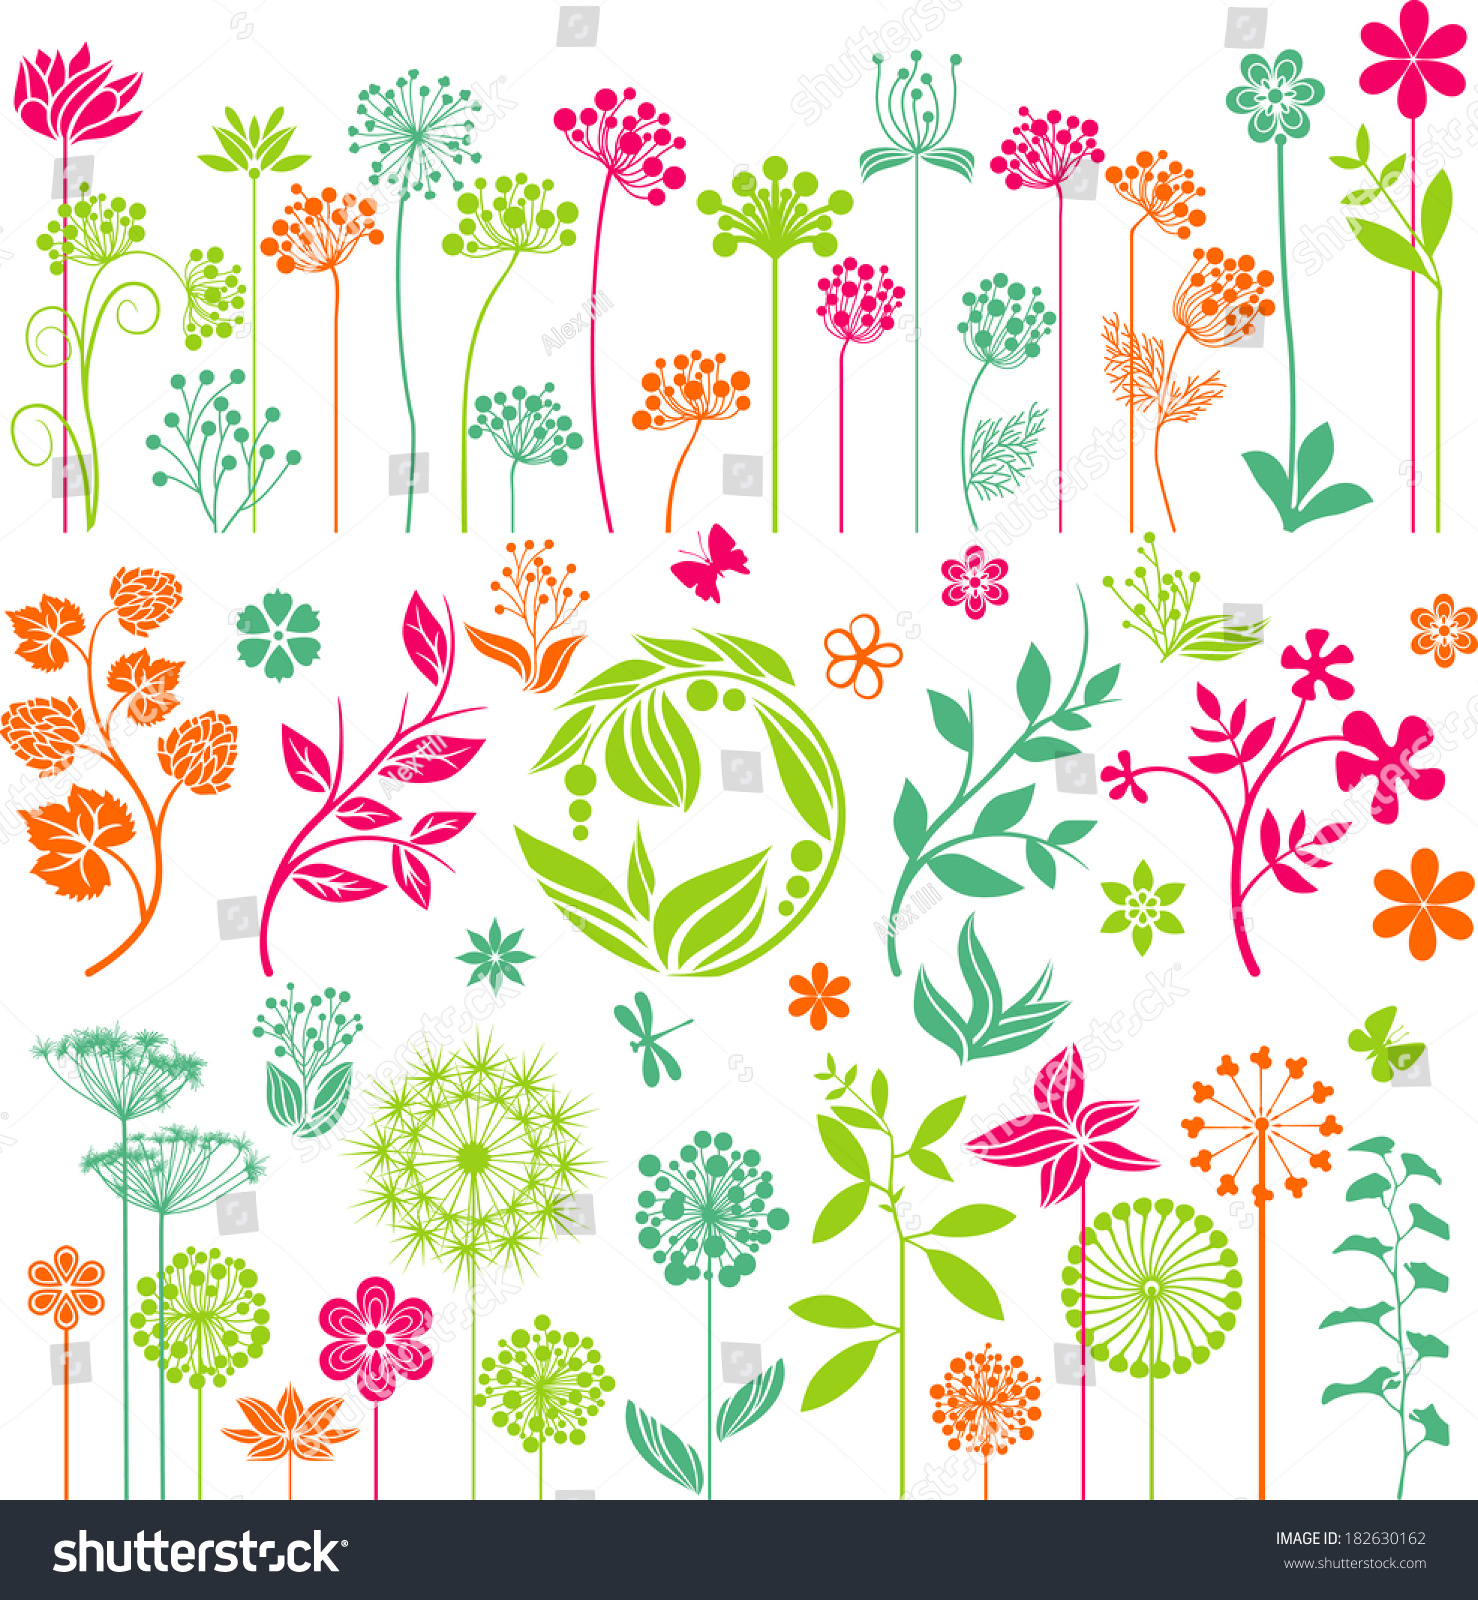 Floral Collection Stock Vector 182630162 - Shutterstock